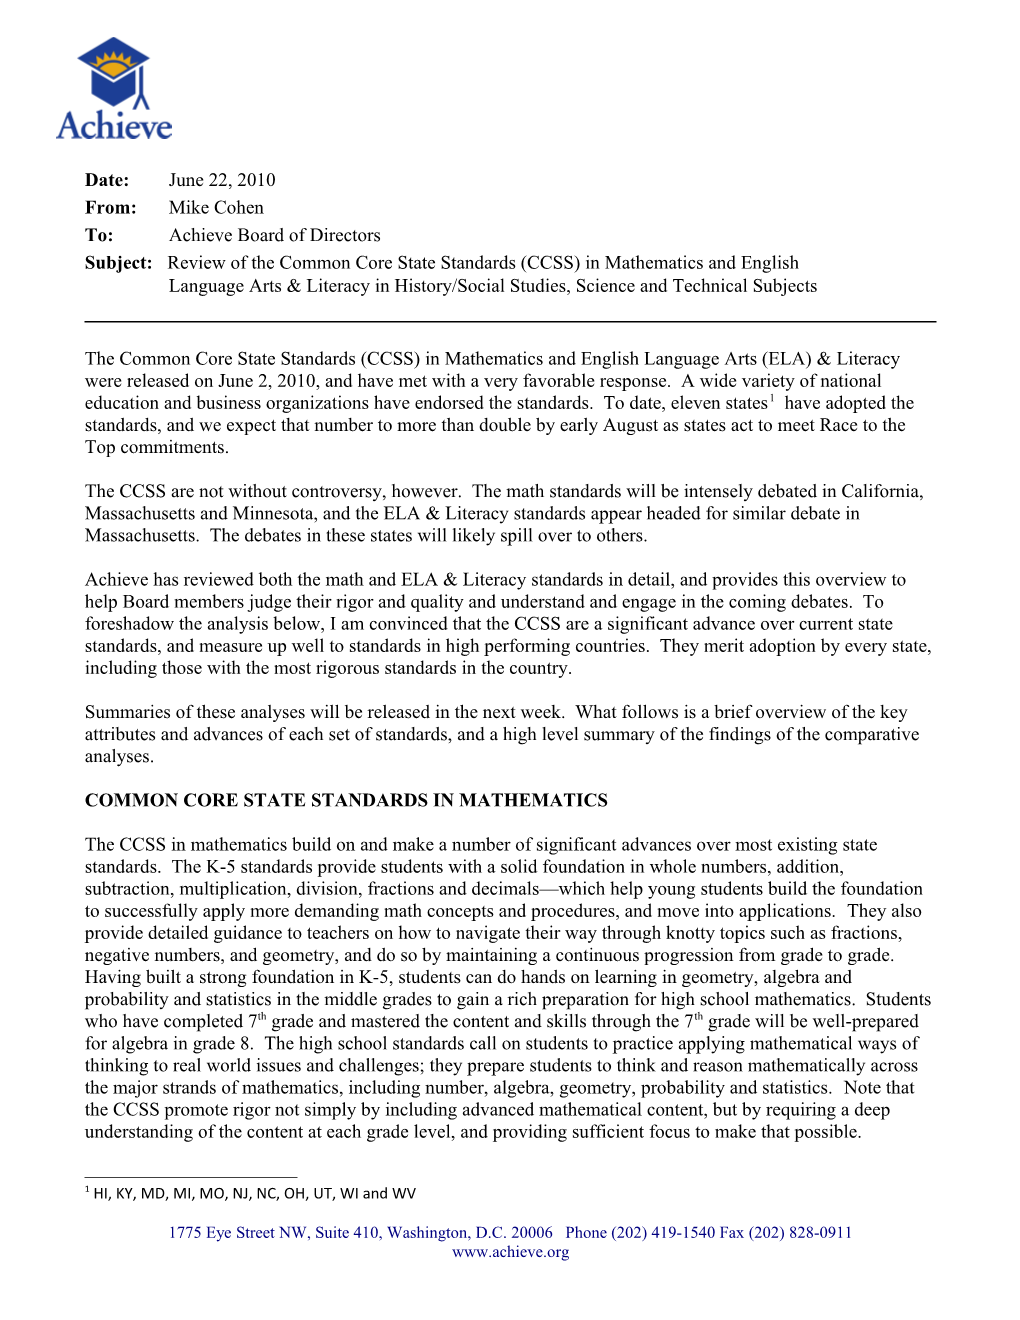 Achieve Memo: Review of the Common Core State Standards (CCSS)